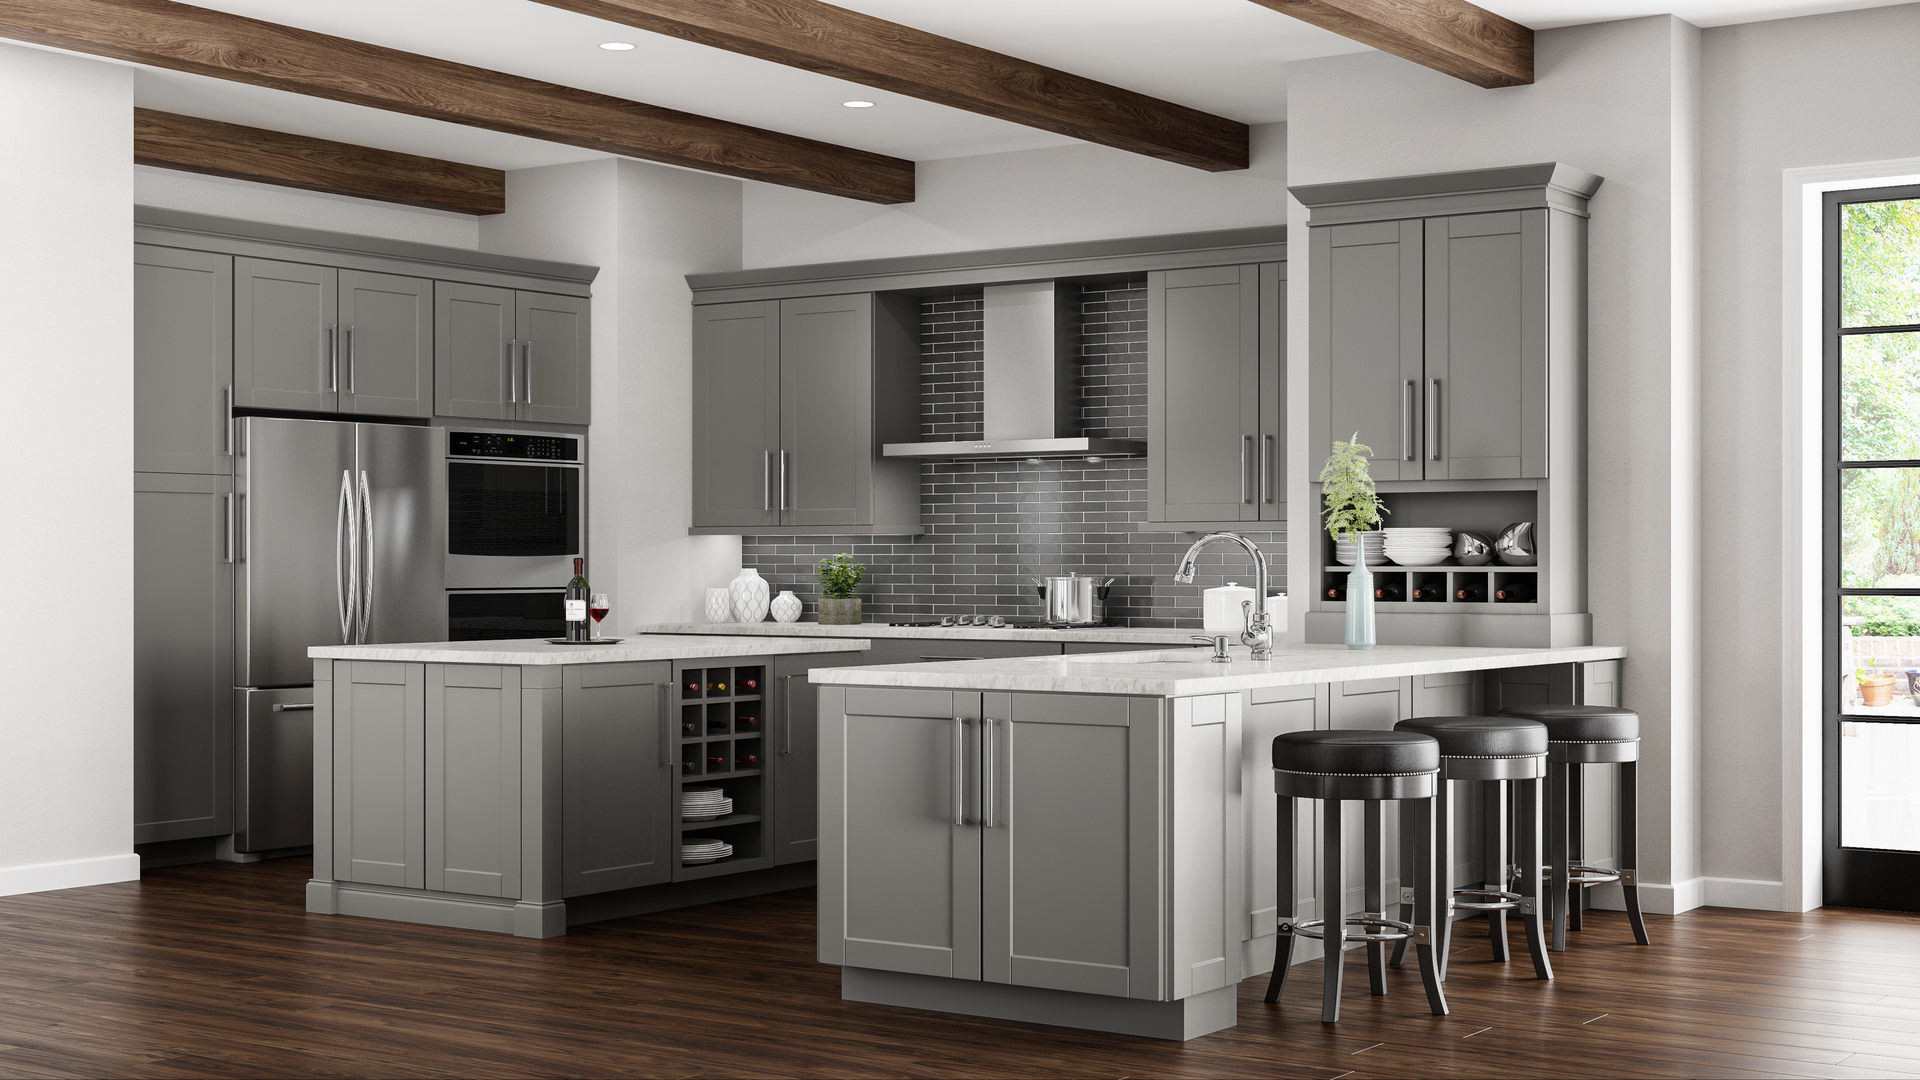 Grey Cabinets Kitchen
 Shaker Base Cabinets in Dove Gray – Kitchen – The Home Depot